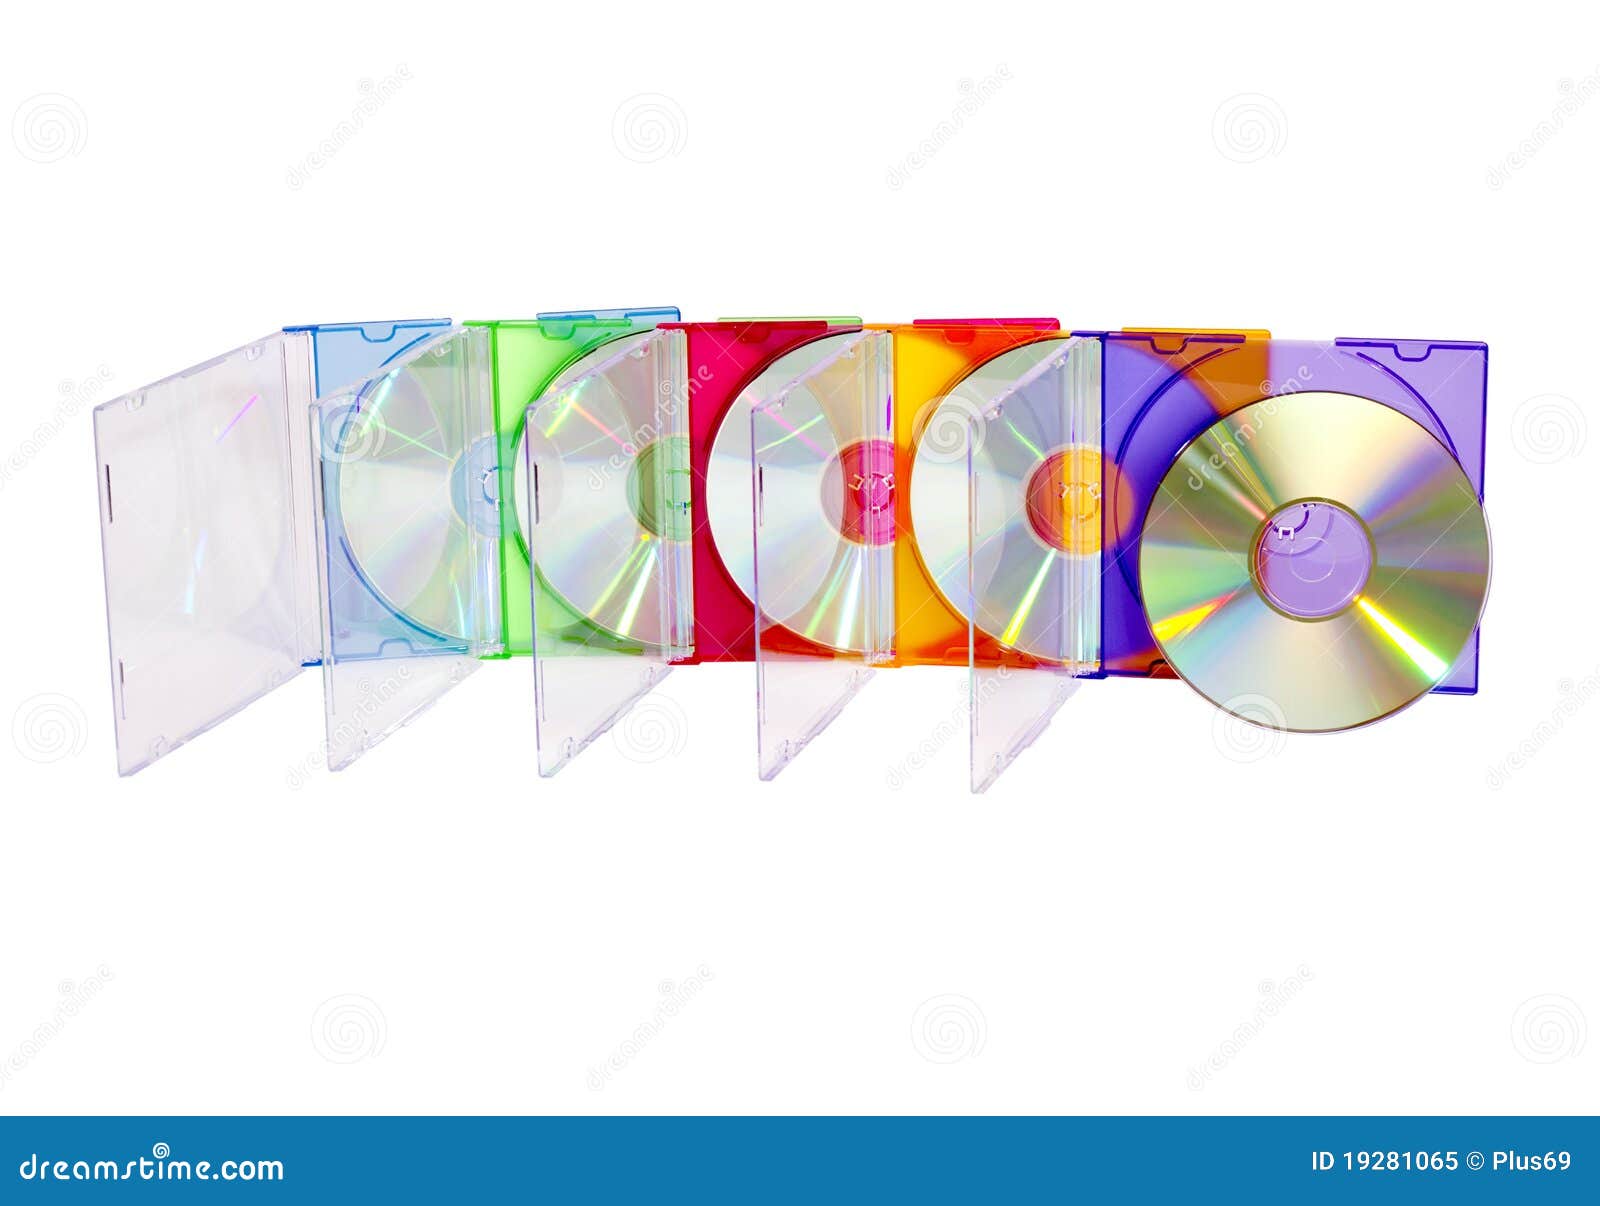 Colorful CDs in boxes stock image. Image of idea, electronics - 19281065